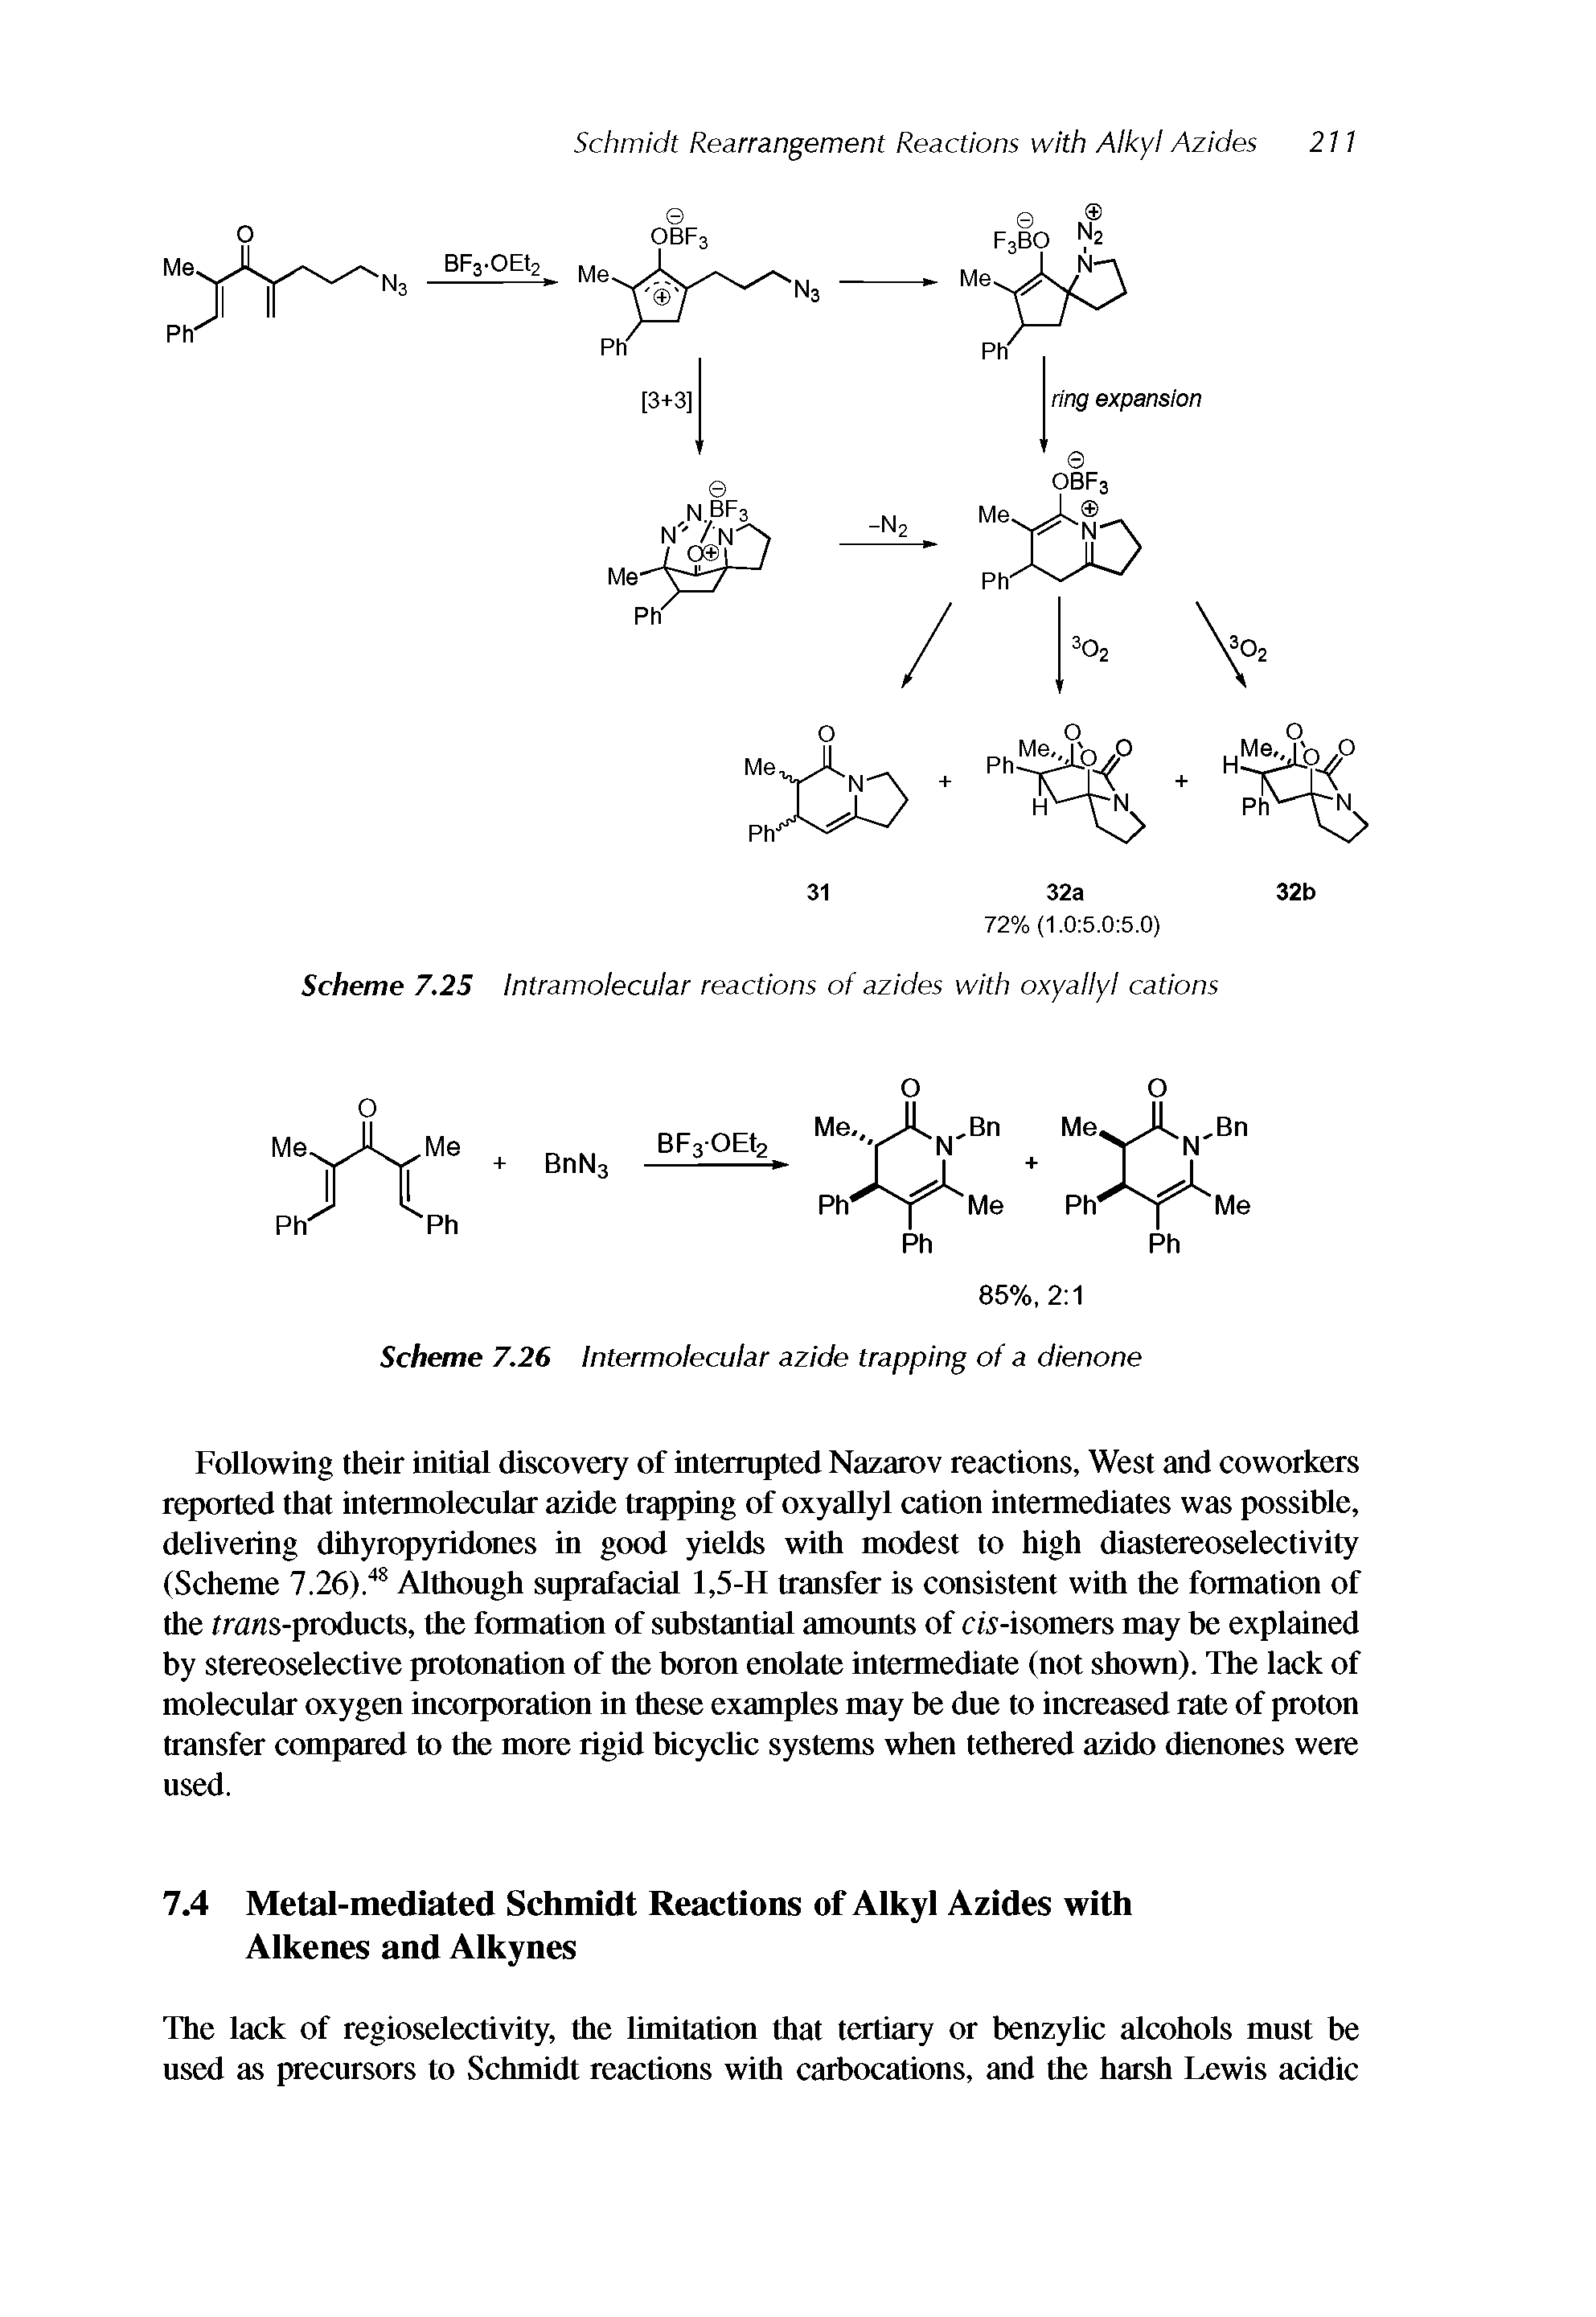 Scheme 7.25 Intramolecular reactions of azides with oxyallyl cations...